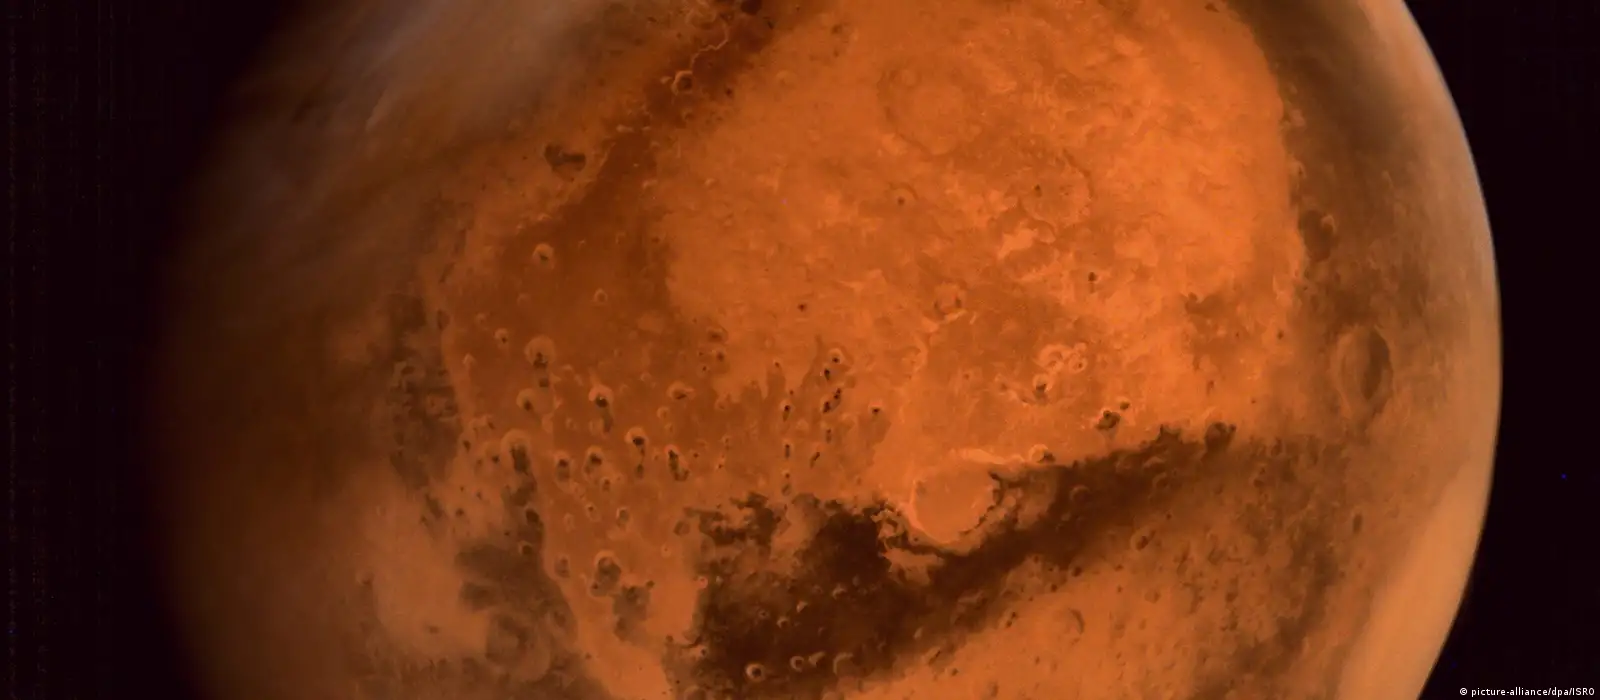 Liquid water on Mars? New research indicates buried 'lakes